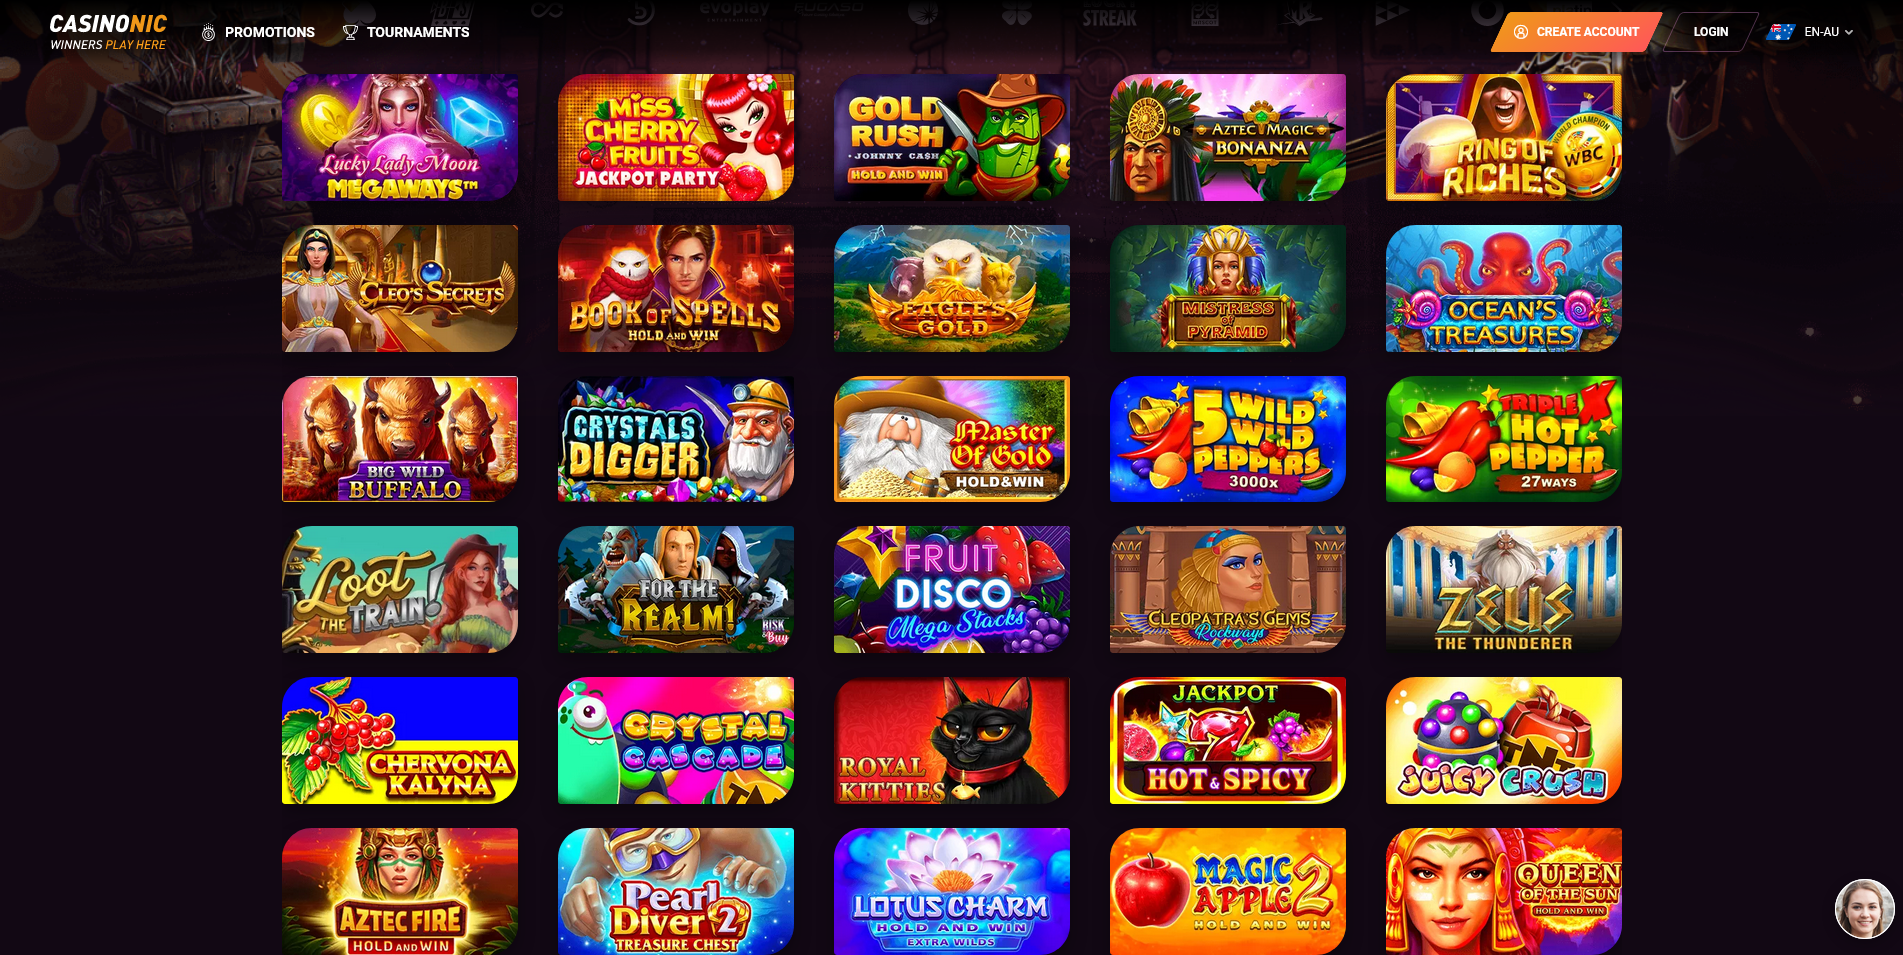 Screenshot of the Casinonic Game section